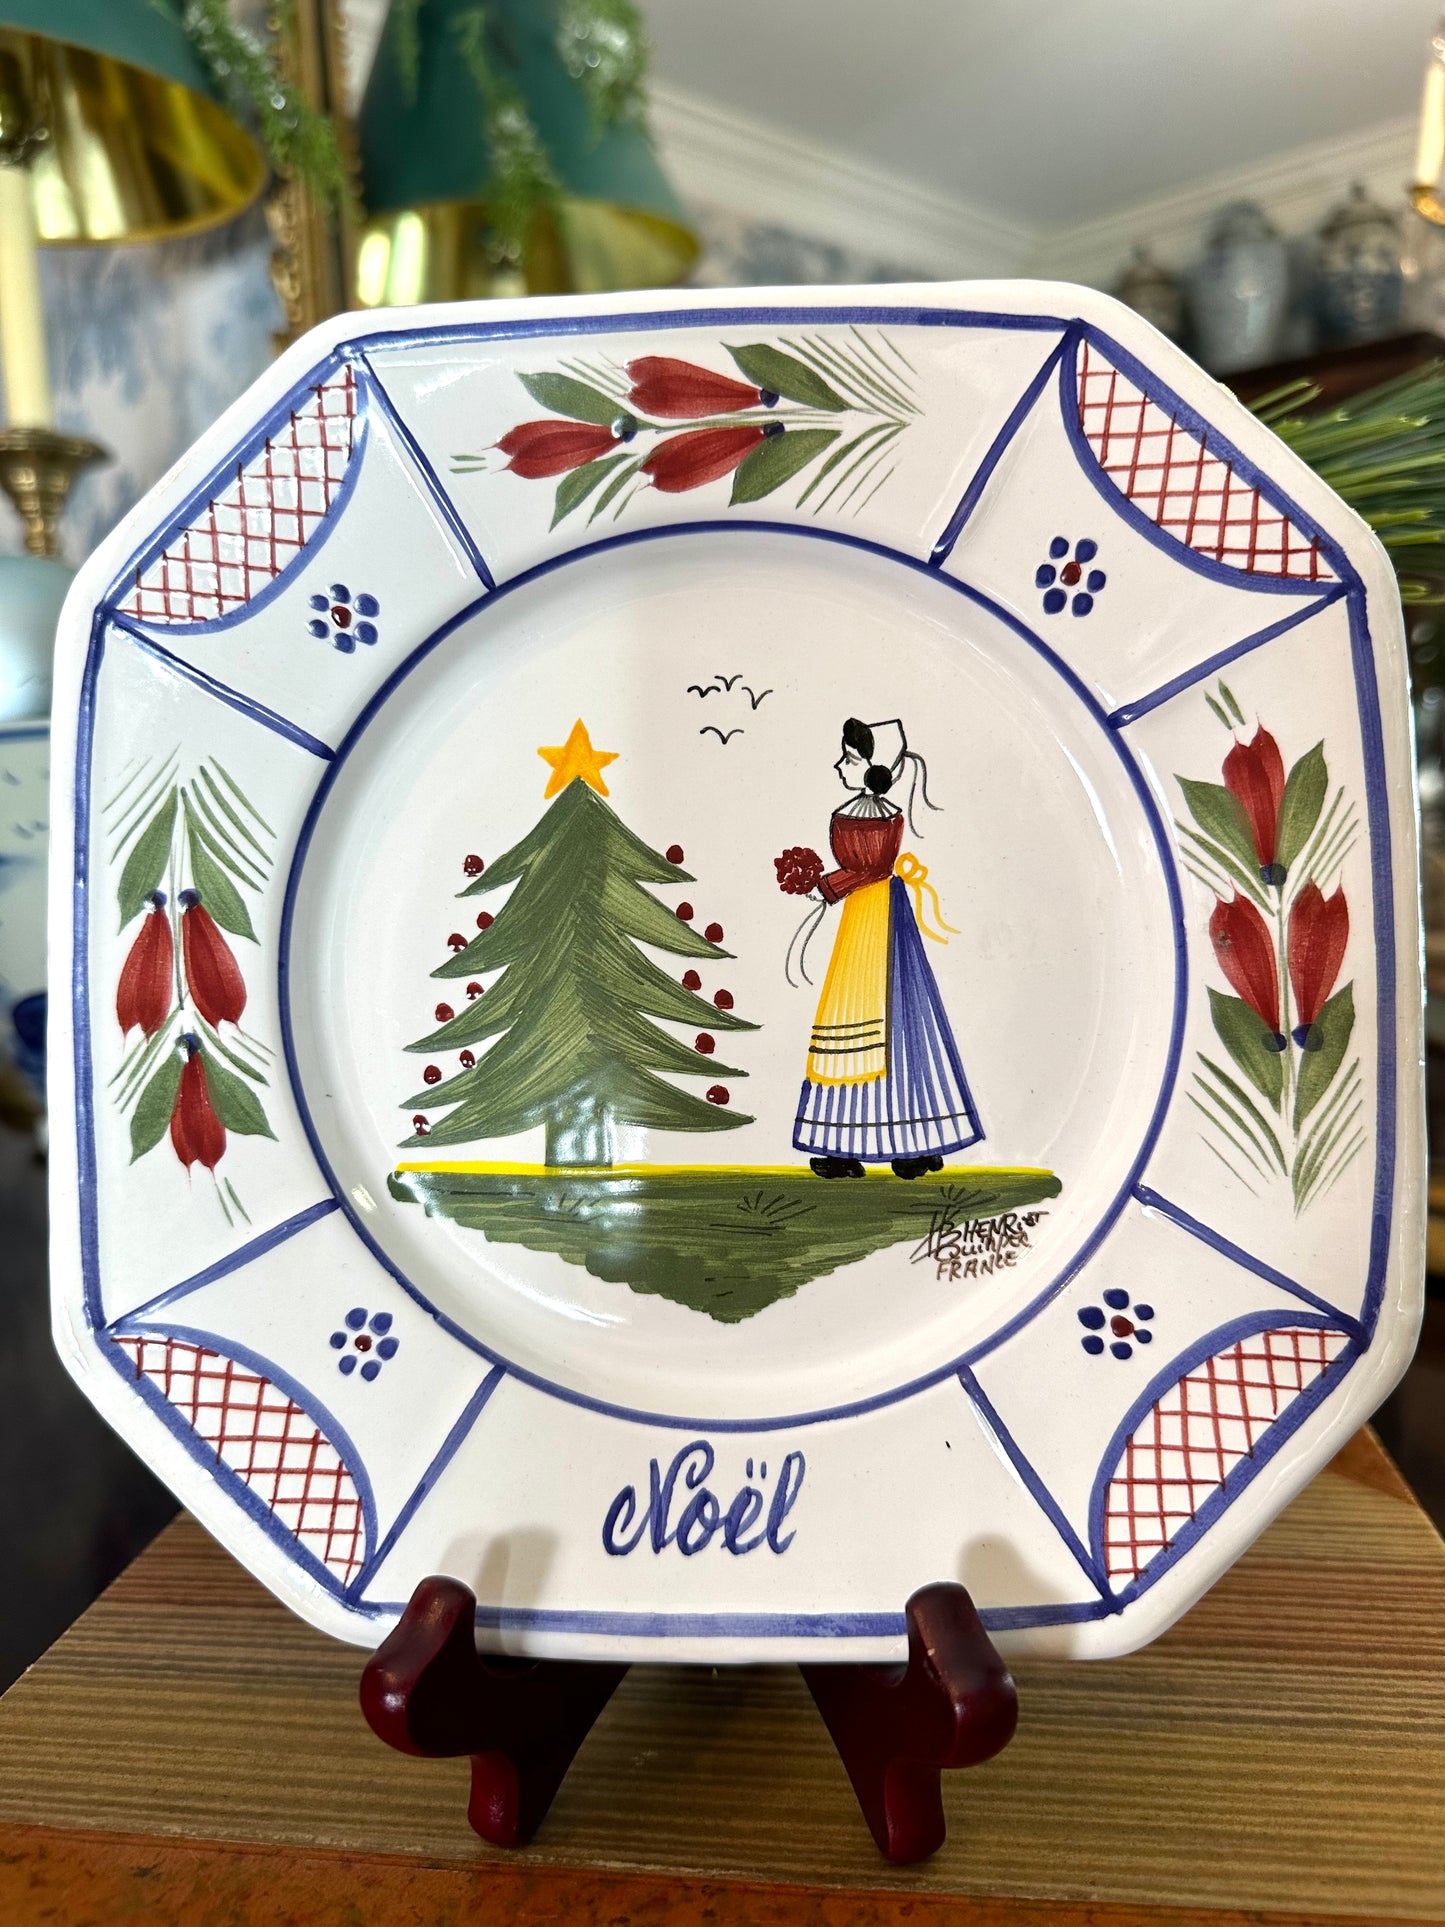 Christmas Henriot Quimper “Noel” 2003 French Faience Plate